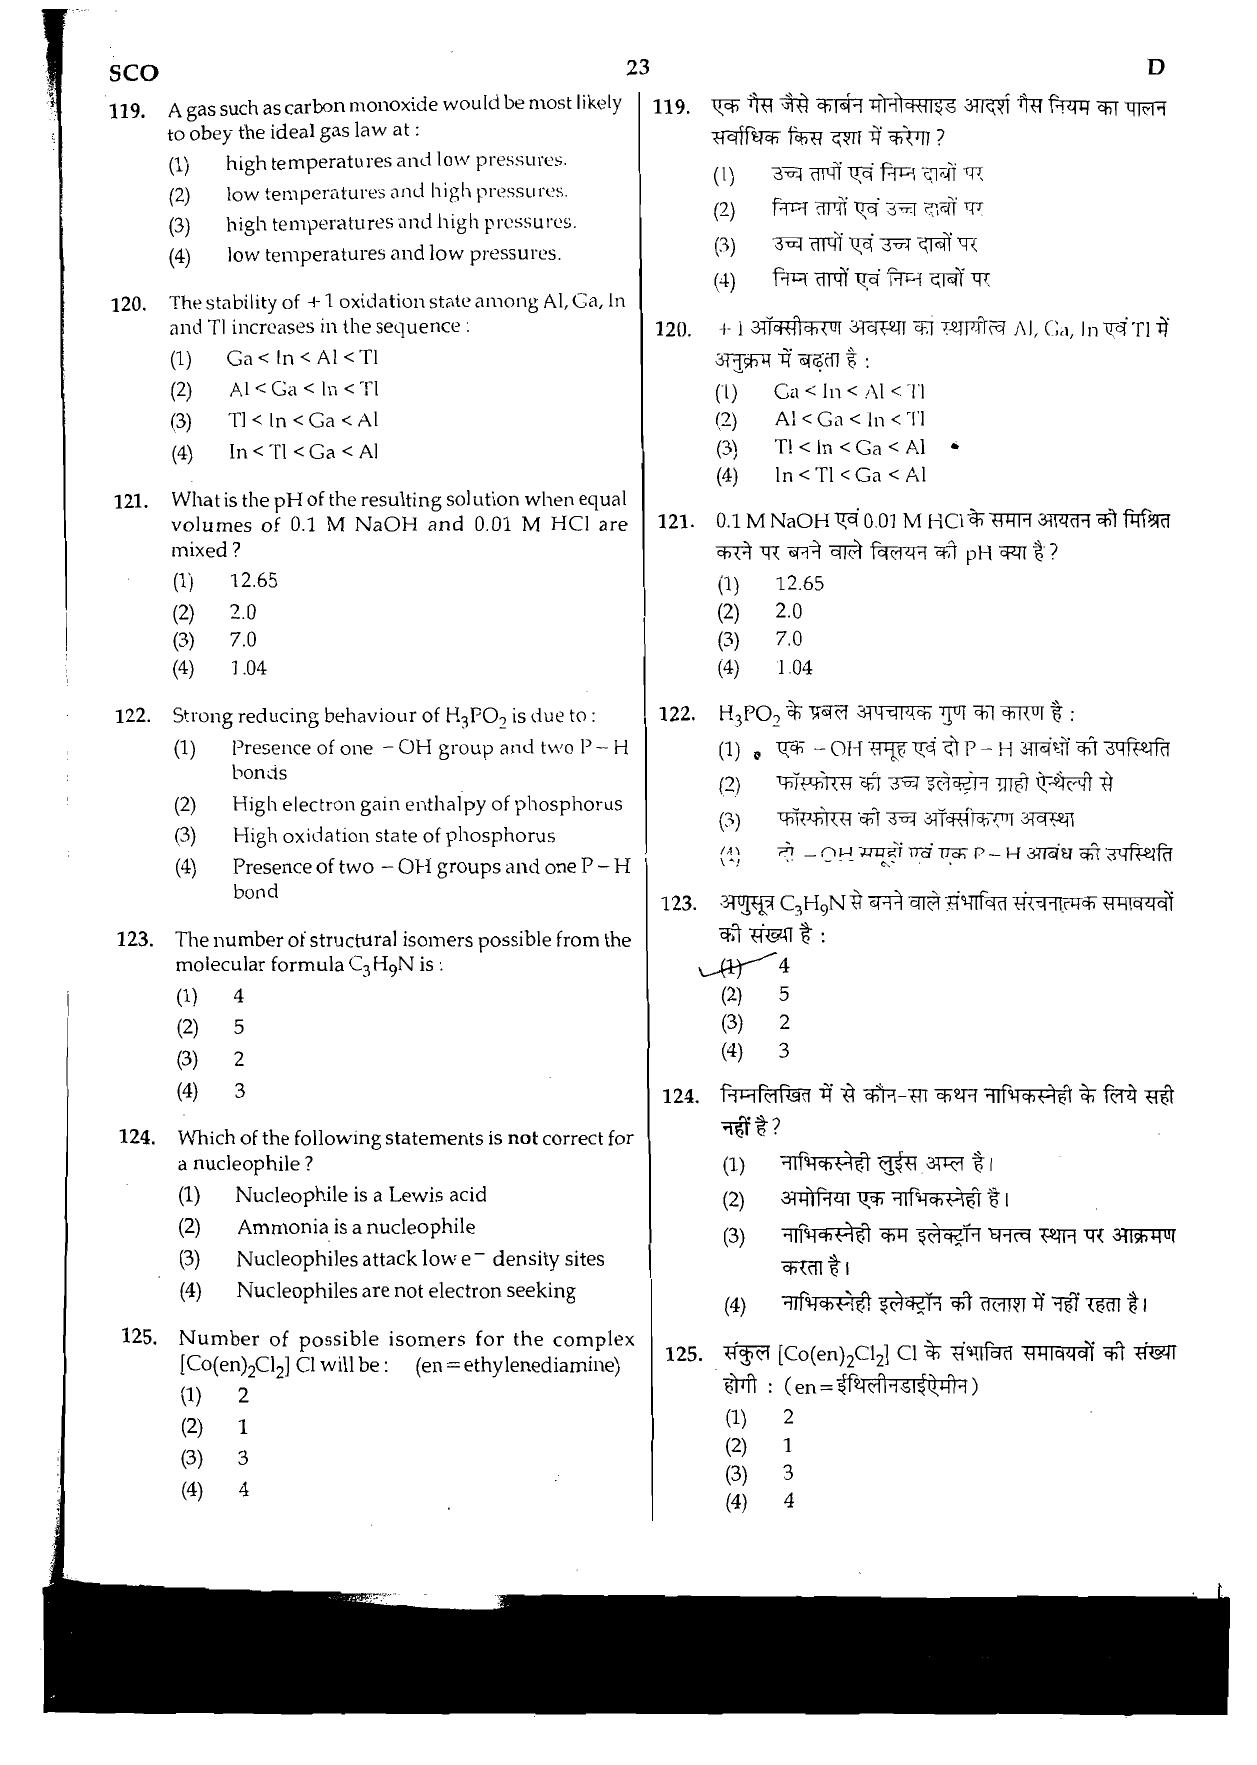 NEET Code D 2015 Question Paper - Page 23